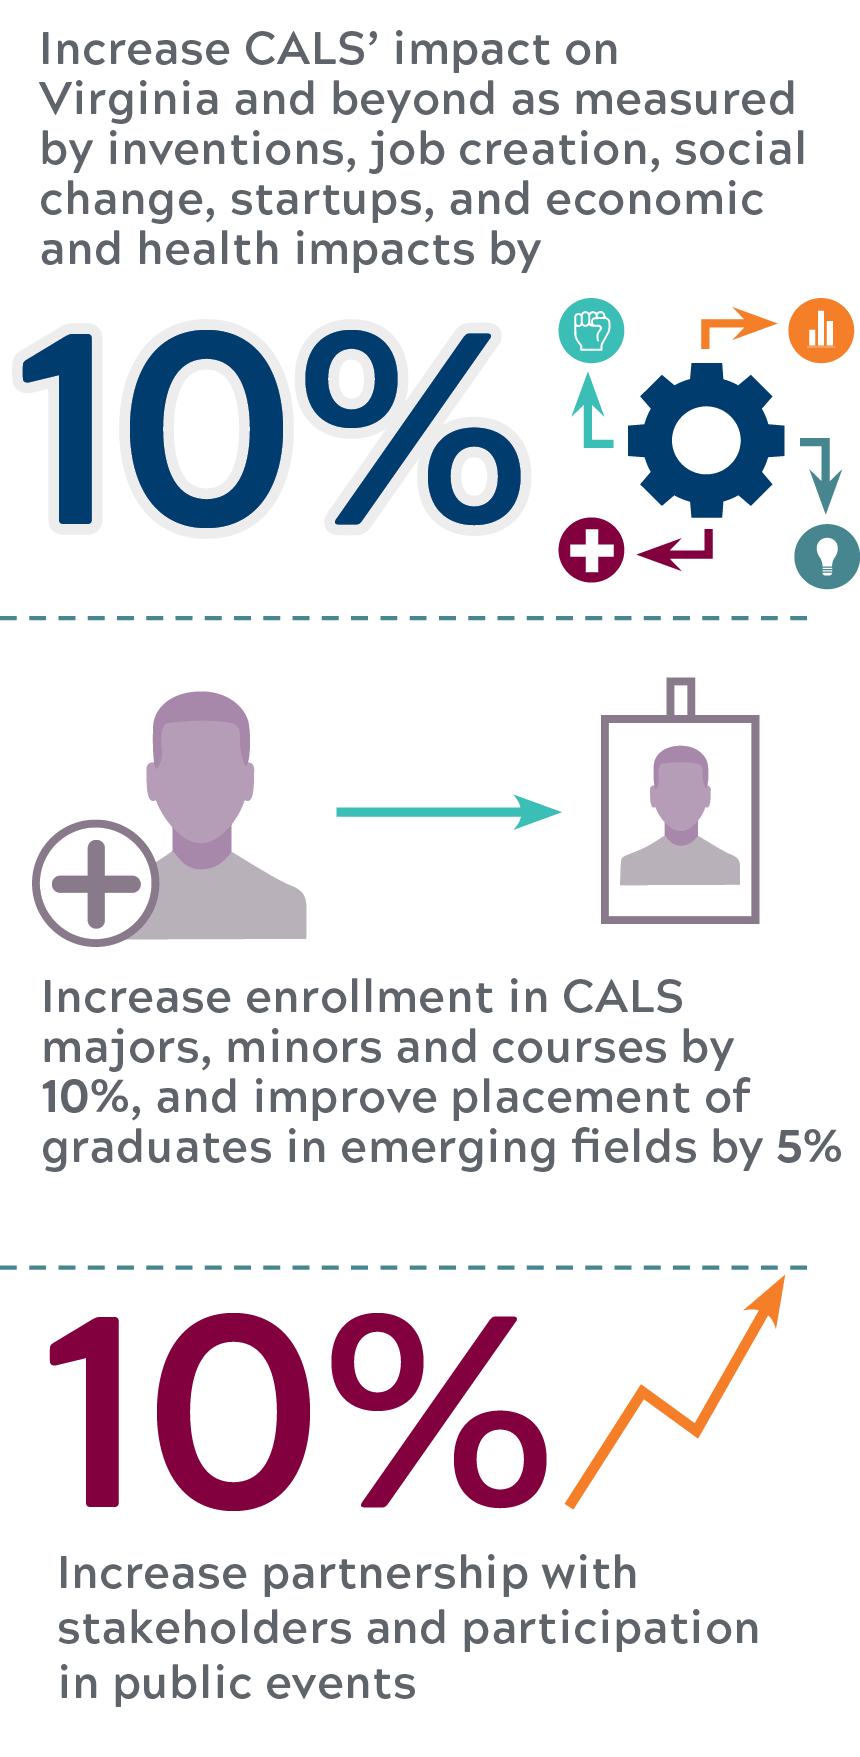 Increase CALS' impact on Virginia and beyond as measured by inventions, job creation, social change, startups, and economic and health impacts by 10%. Increase enrollment in CALS majors, minors, and courses by 10%, and improve placement of graduates in emerging fields by 5%. 10% increase partnership with stakeholders and partcipation in public events.